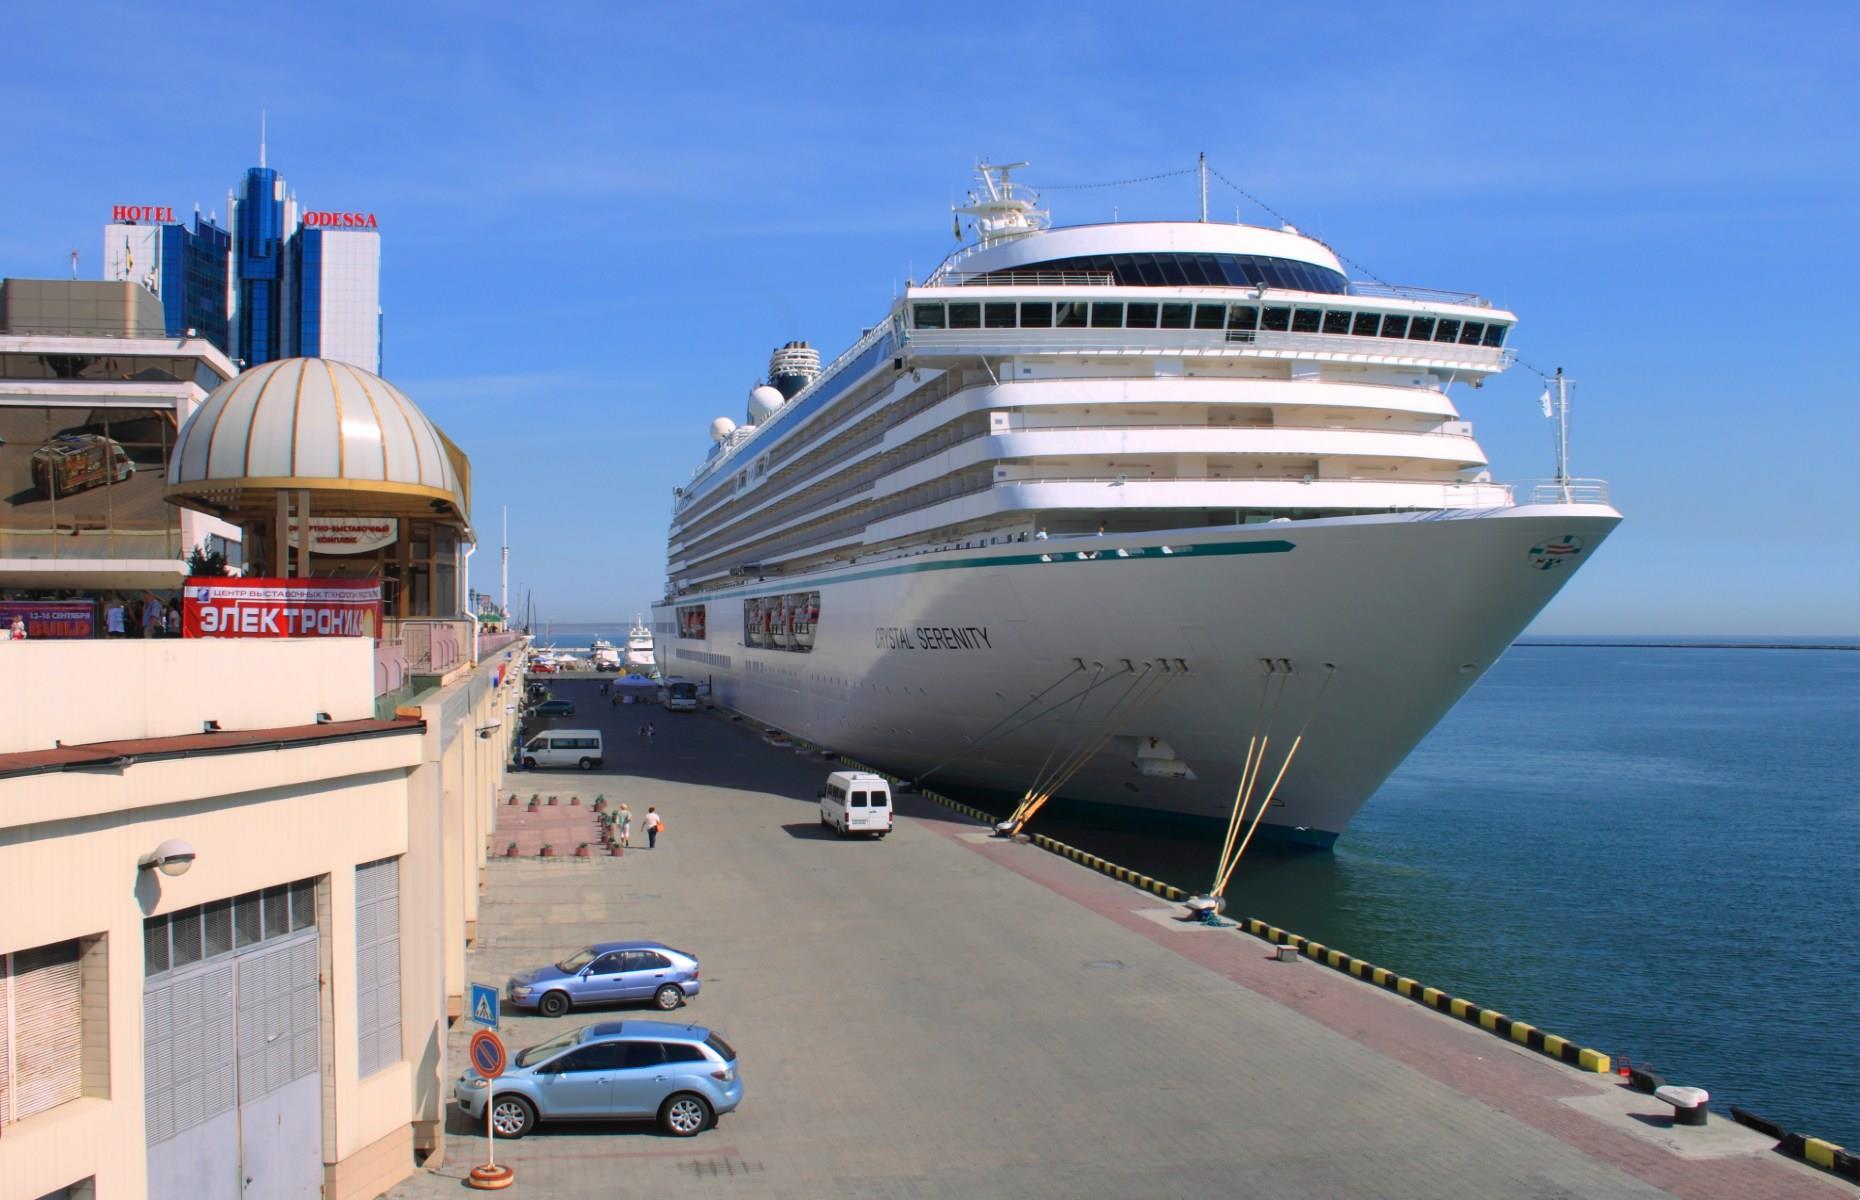 <p>However, in January 2022, Crystal Cruises' parent company Genting Hong Kong revealed it could be bankrupt by the end of the month. The inevitable happened in February, when Crystal Serenity and Crystal Symphony were seized by authorities and diverted to the Bahamas with hundreds of passengers still onboard. The US arrest warrant was for an unpaid $4.6 million fuel bill. Crystal Serenity's operations were suspended until at April, but its future remains uncertain.</p>  <p><a href="https://www.loveexploring.com/news/150217/cruise-ships-norwegian-prima-norwegian-cruise-line-ncl-review"><strong>Now read our review of the cutting-edge Norwegian Prima</strong></a></p>